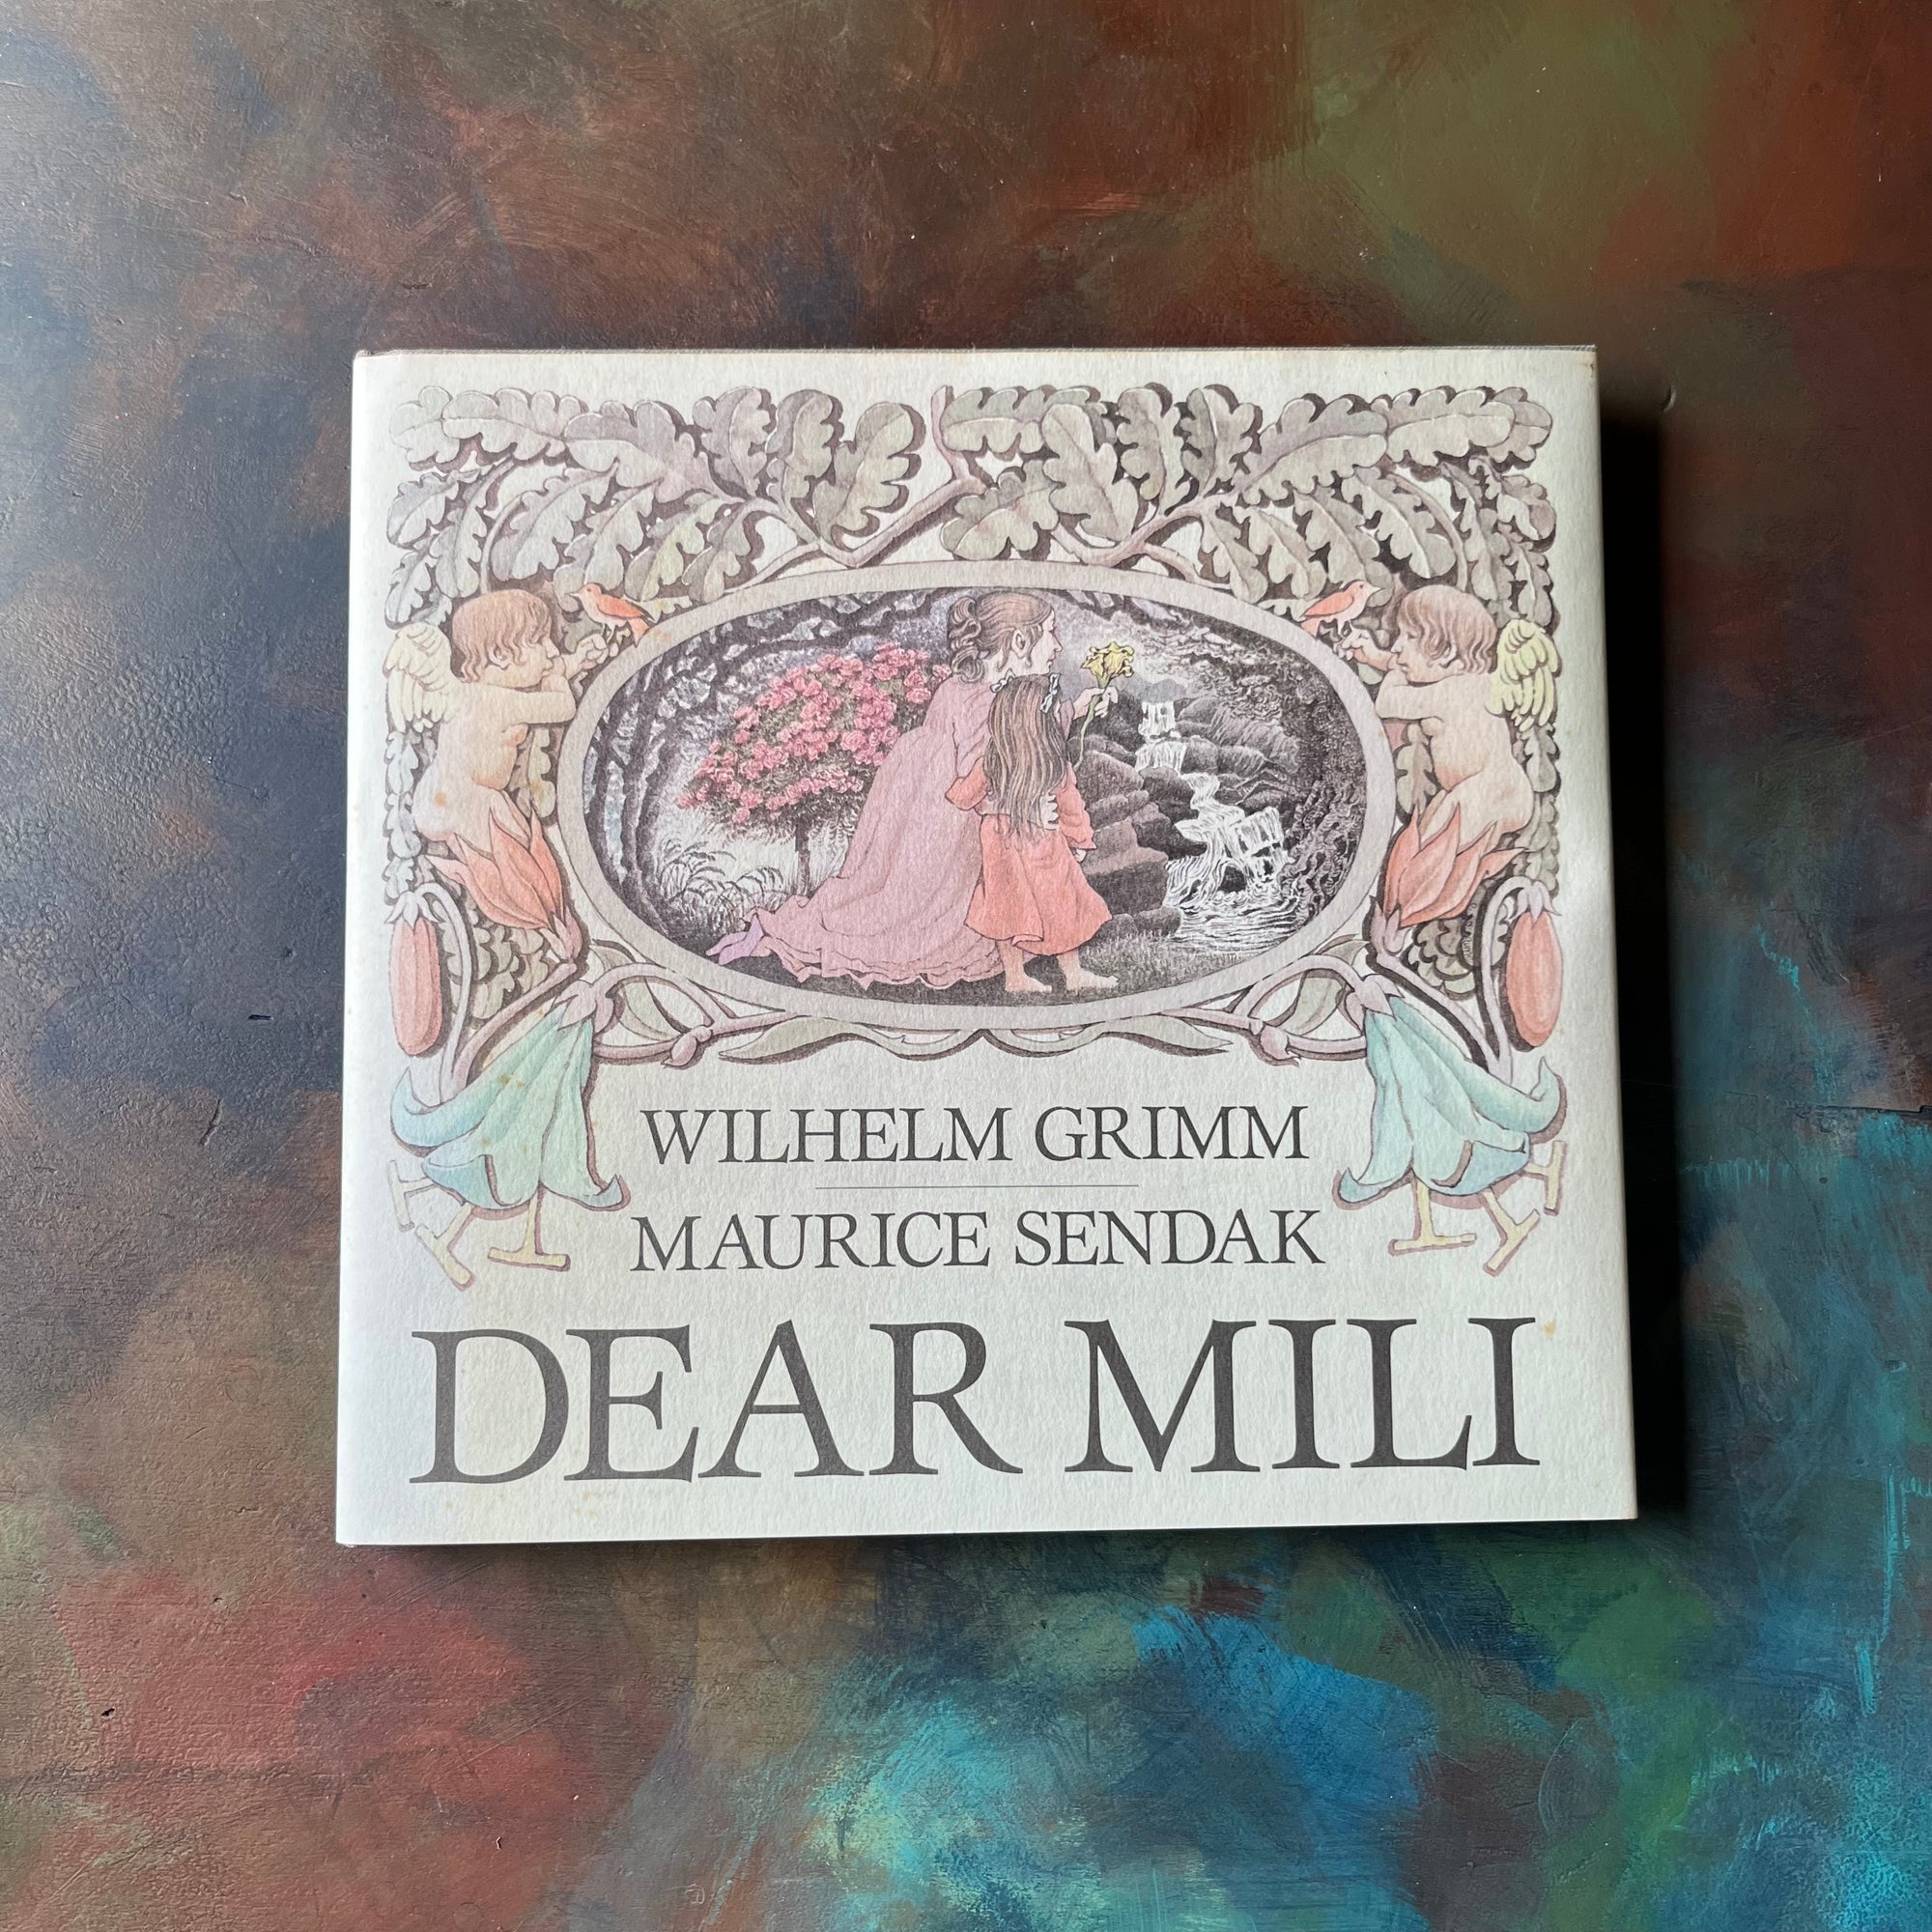 Dear Mili written by Wilhelm Grimm and illustrated by Maurice Sendak-vintage fairy tale-first edition-view of the dust jacket's front cover